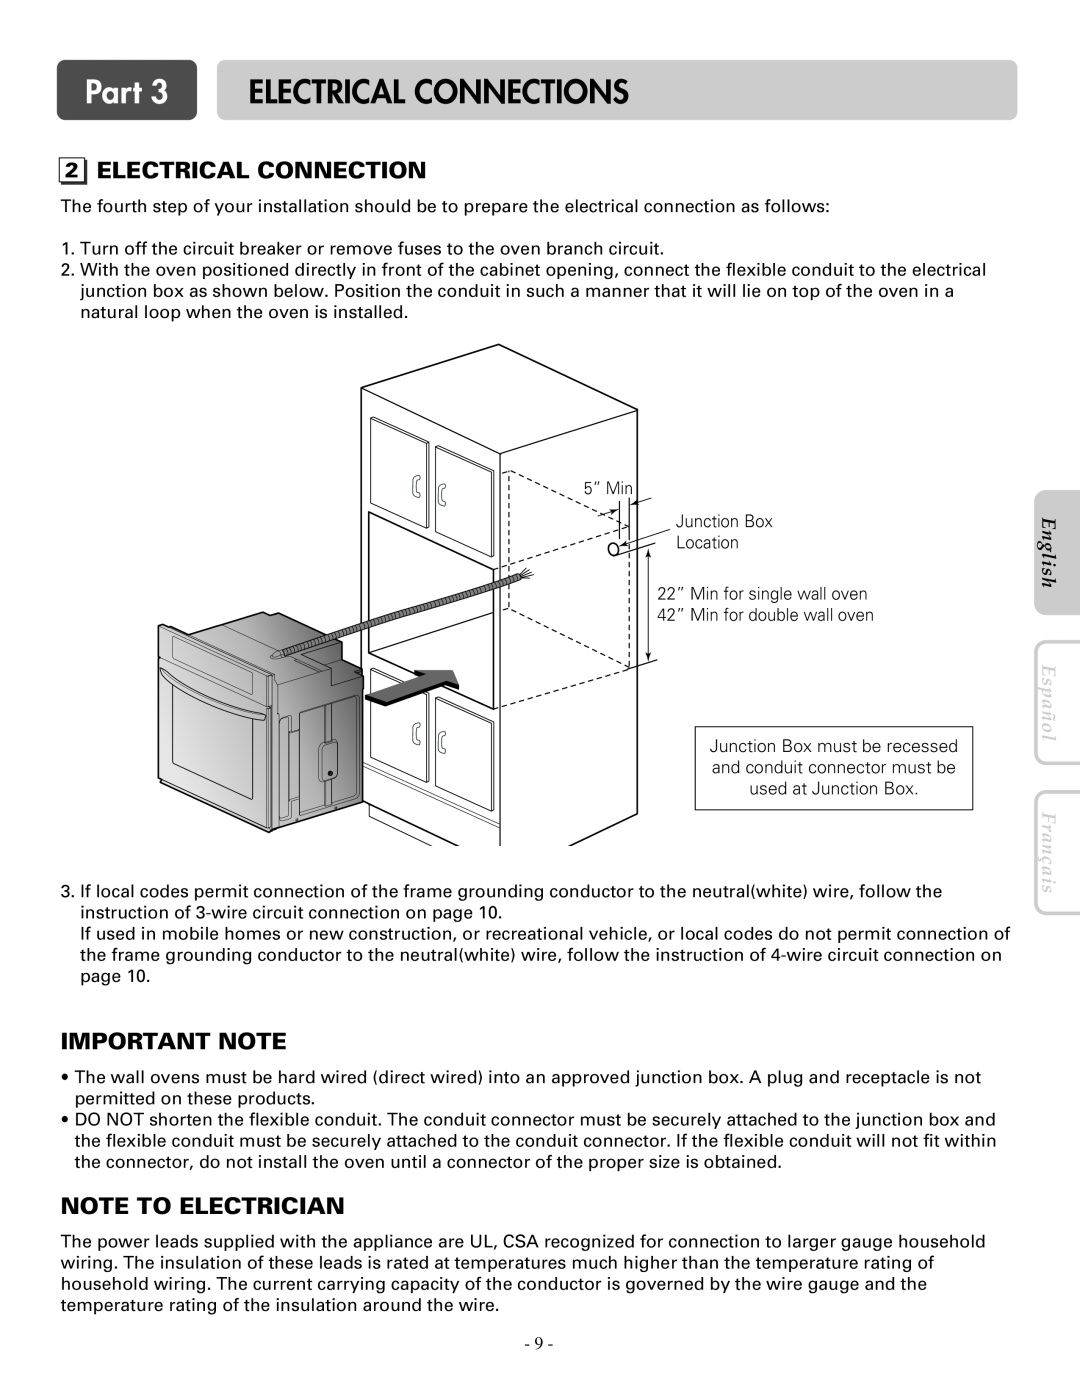 LG Electronics LWD3081ST Electrical Connection, Note To Electrician, Part 3 ELECTRICAL CONNECTIONS, Important Note 